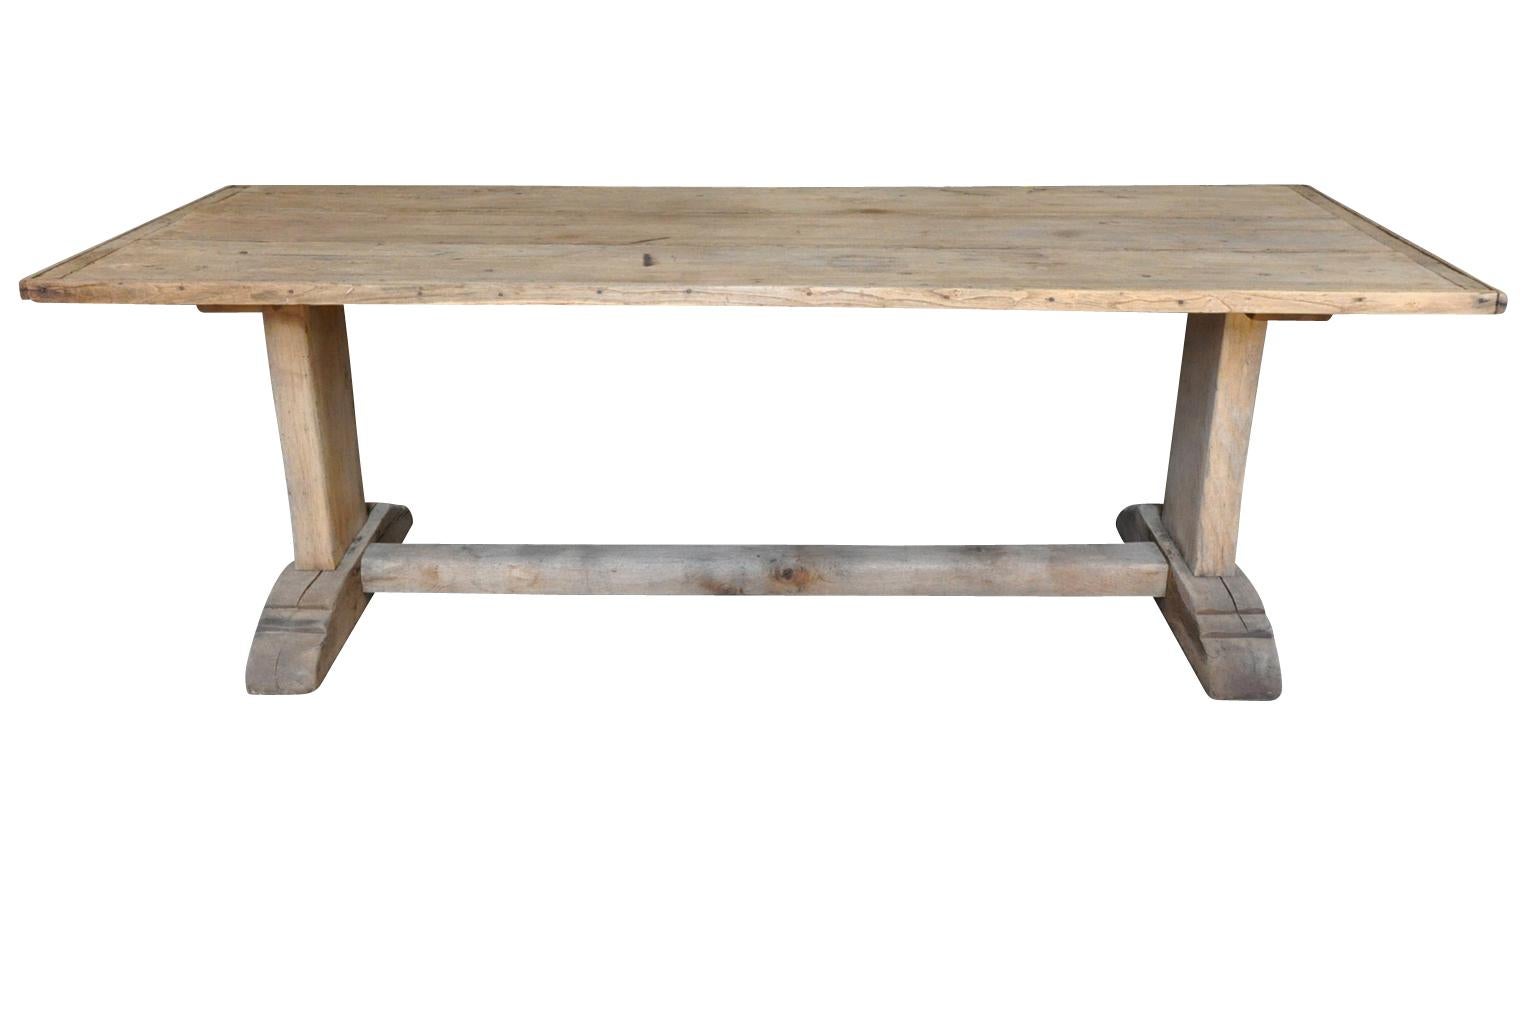 A very handsome farm table, trestle table from the Catalan region of Spain. Wonderfully and very soundly constructed from naturally washed oak with terrific minimalist design. Great patina.